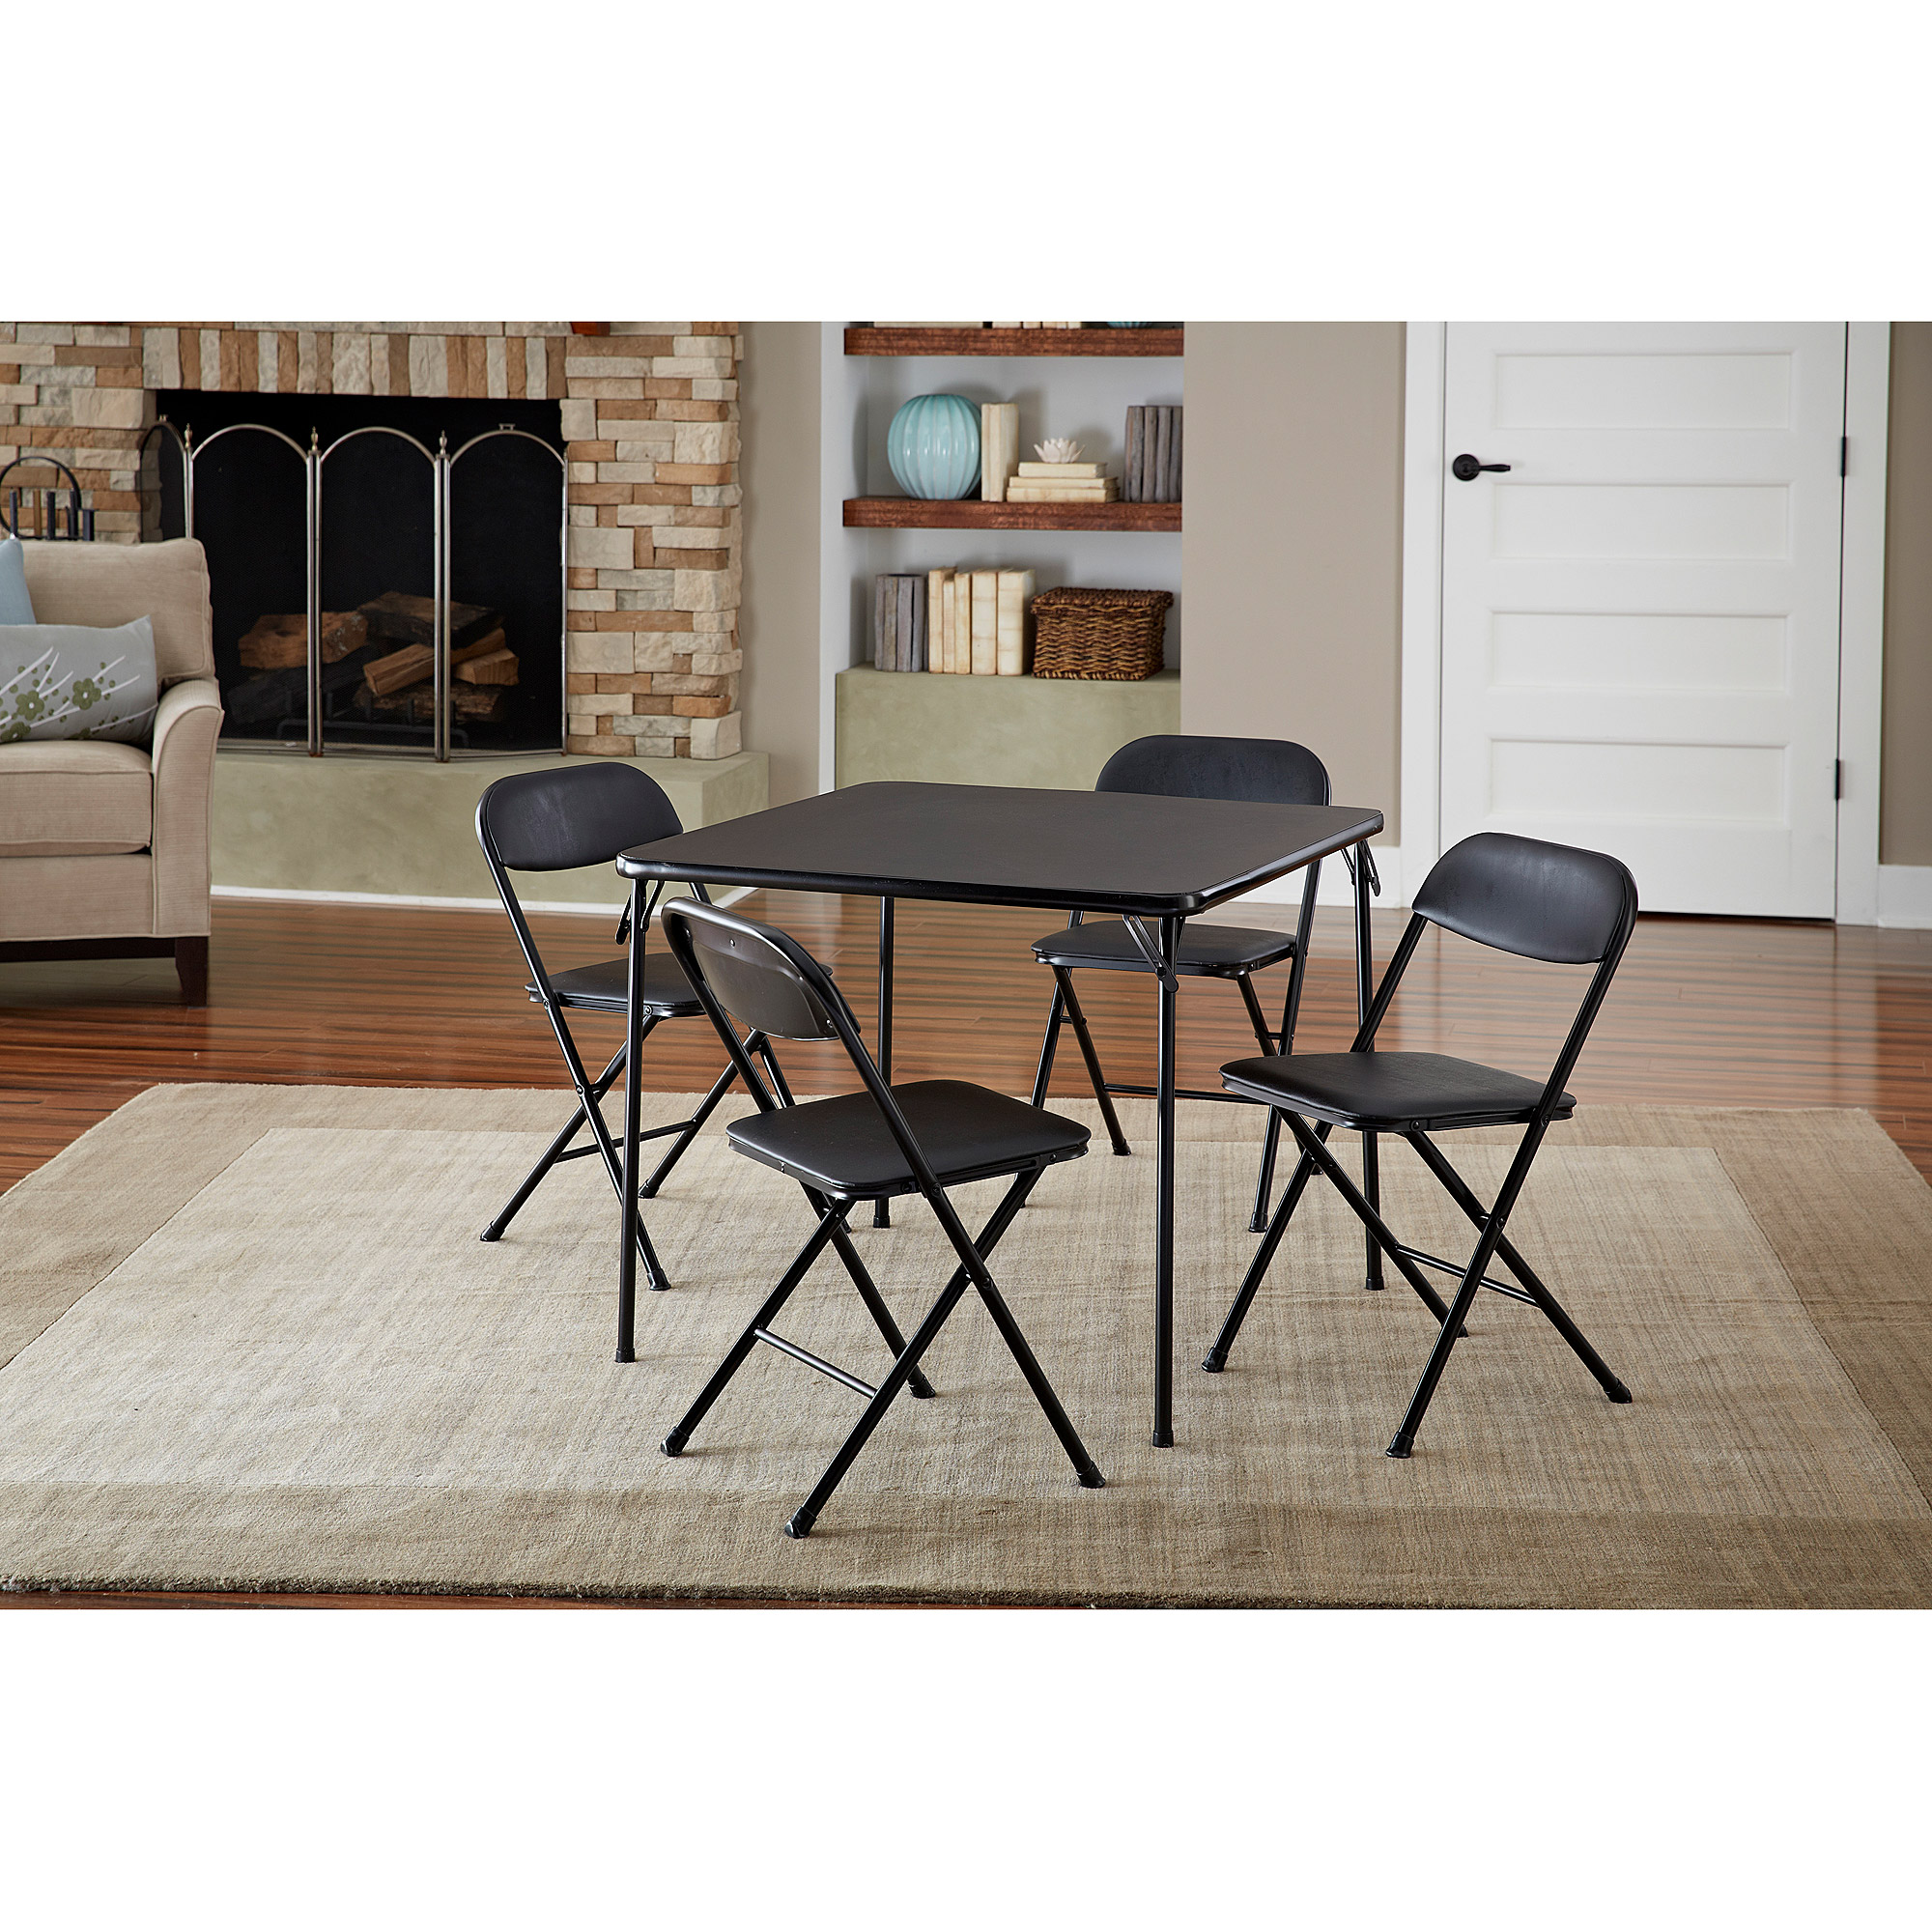 Cosco 5-Piece Card Table Set, Black - image 1 of 7